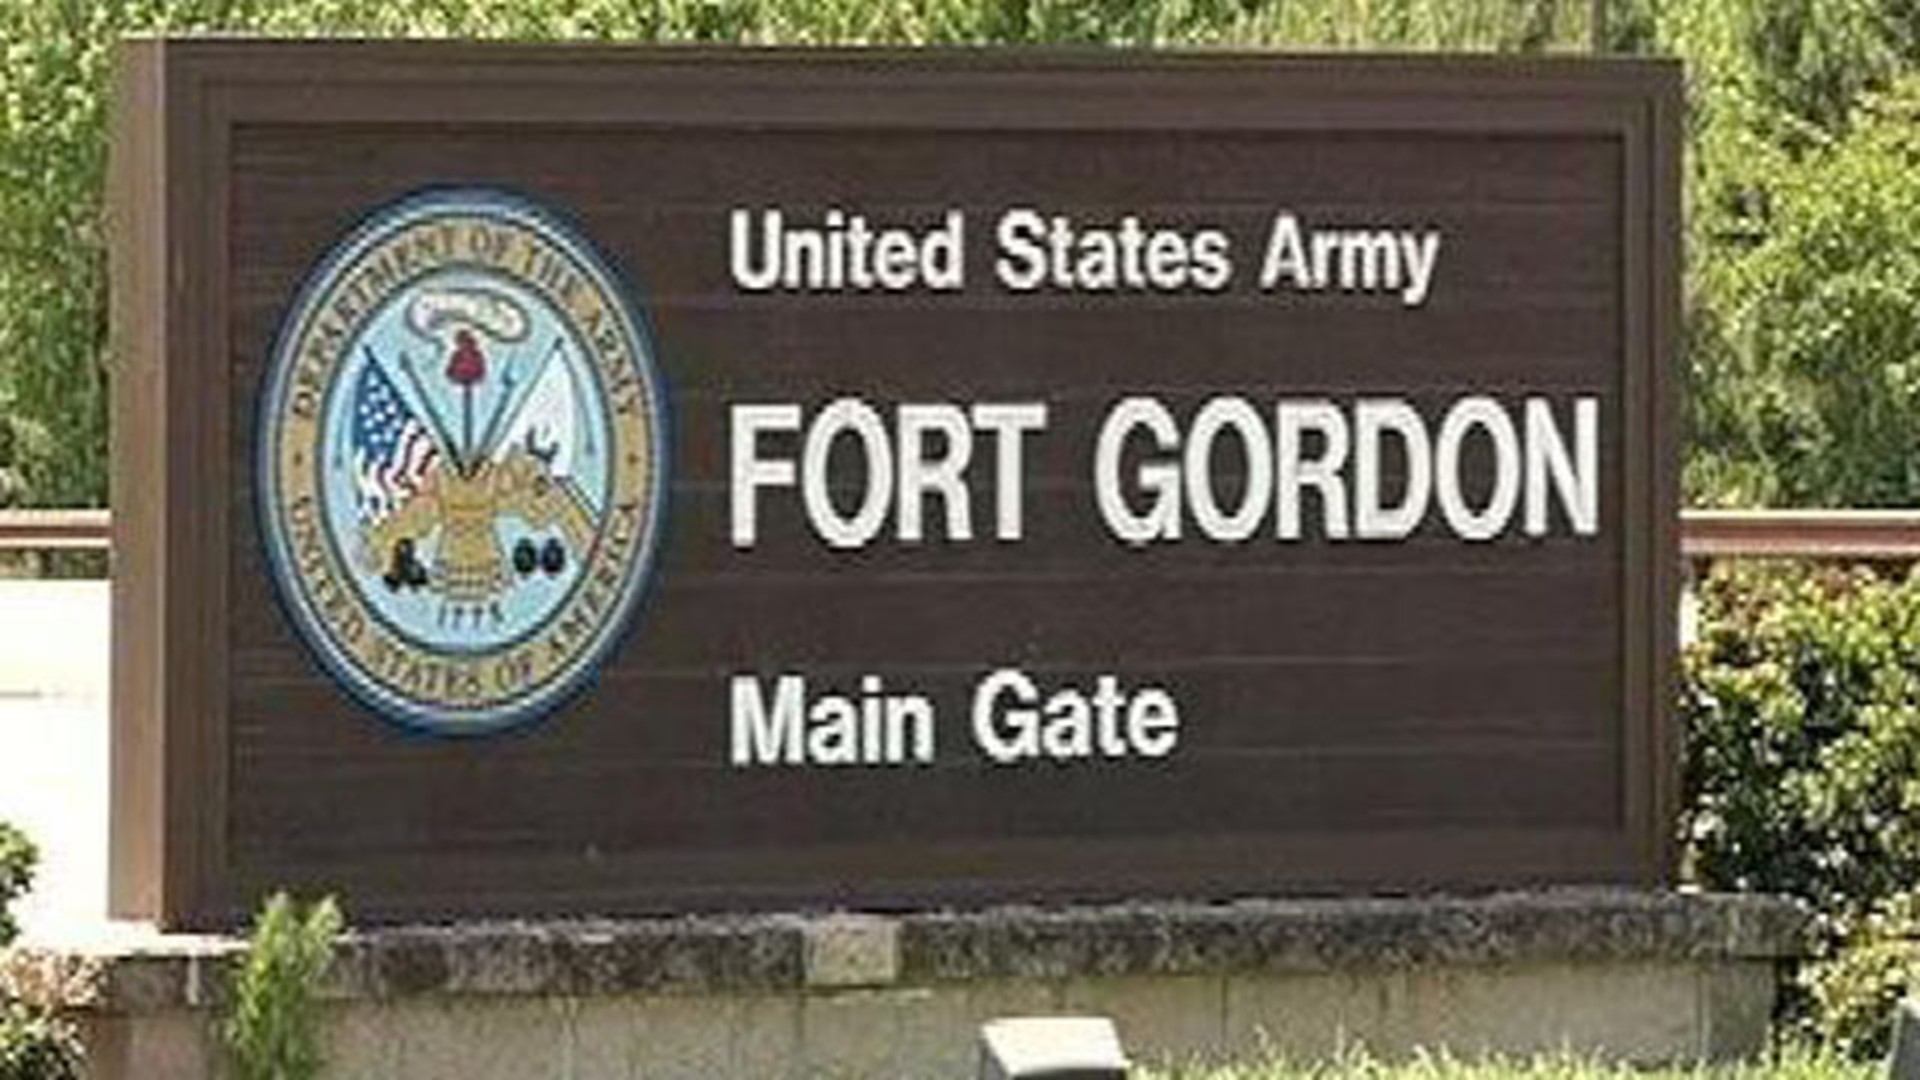 Fort Gordon Range Control told news outlets the lightning hit during a thunderstorm late Wednesday morning.